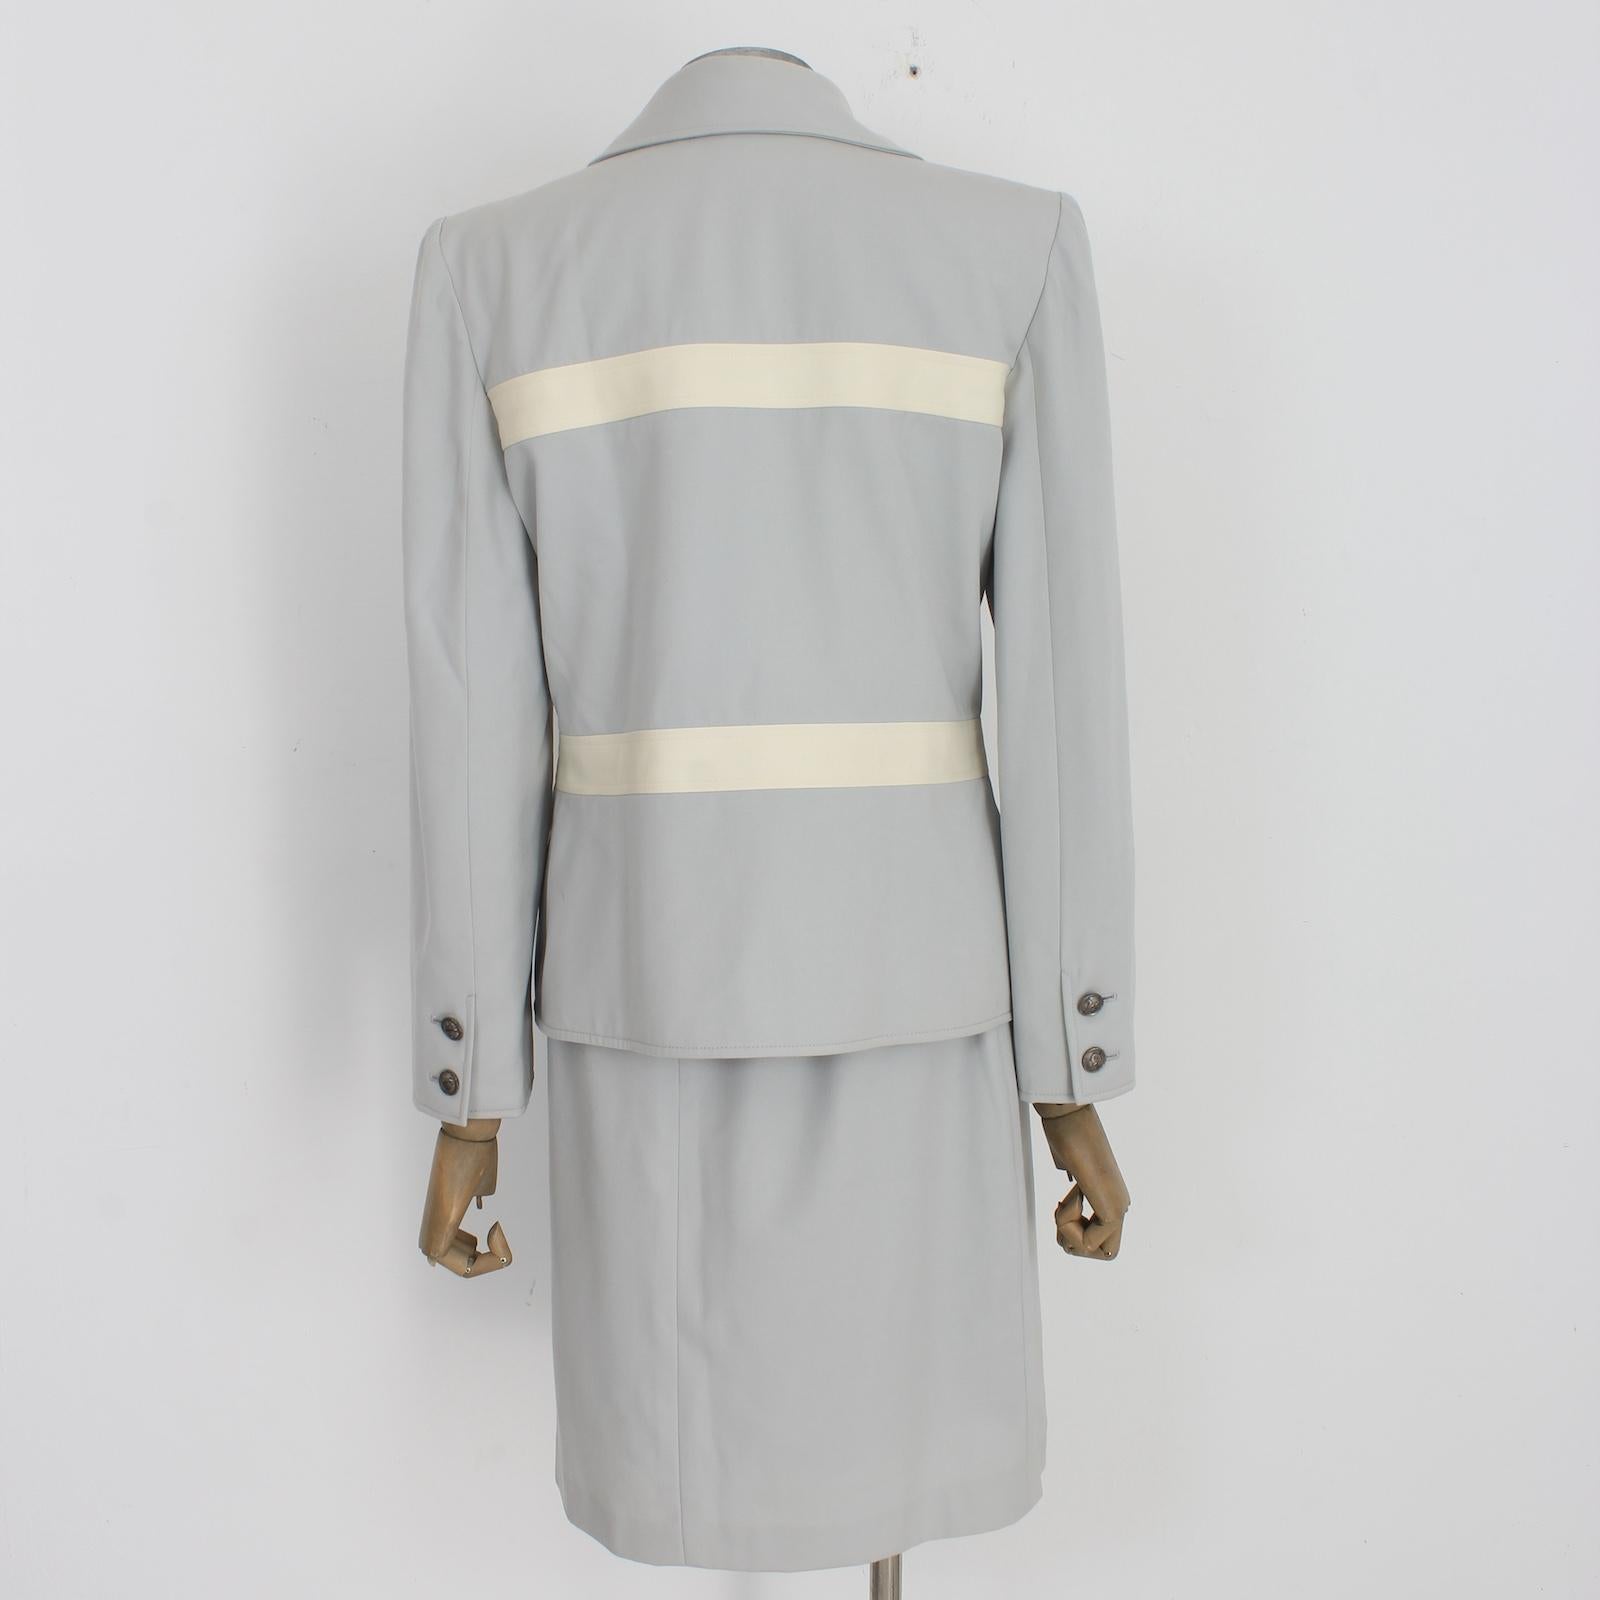 Valentino Boutique vintage 80s outfit. Light blue jacket and skirt with white details, clip closure and logo buttons on the sleeves. Pencil skirt, wool fabric, internally lined. The skirt has an elastic inside. Made in Italy.

Size: 46 It 12 Us 14